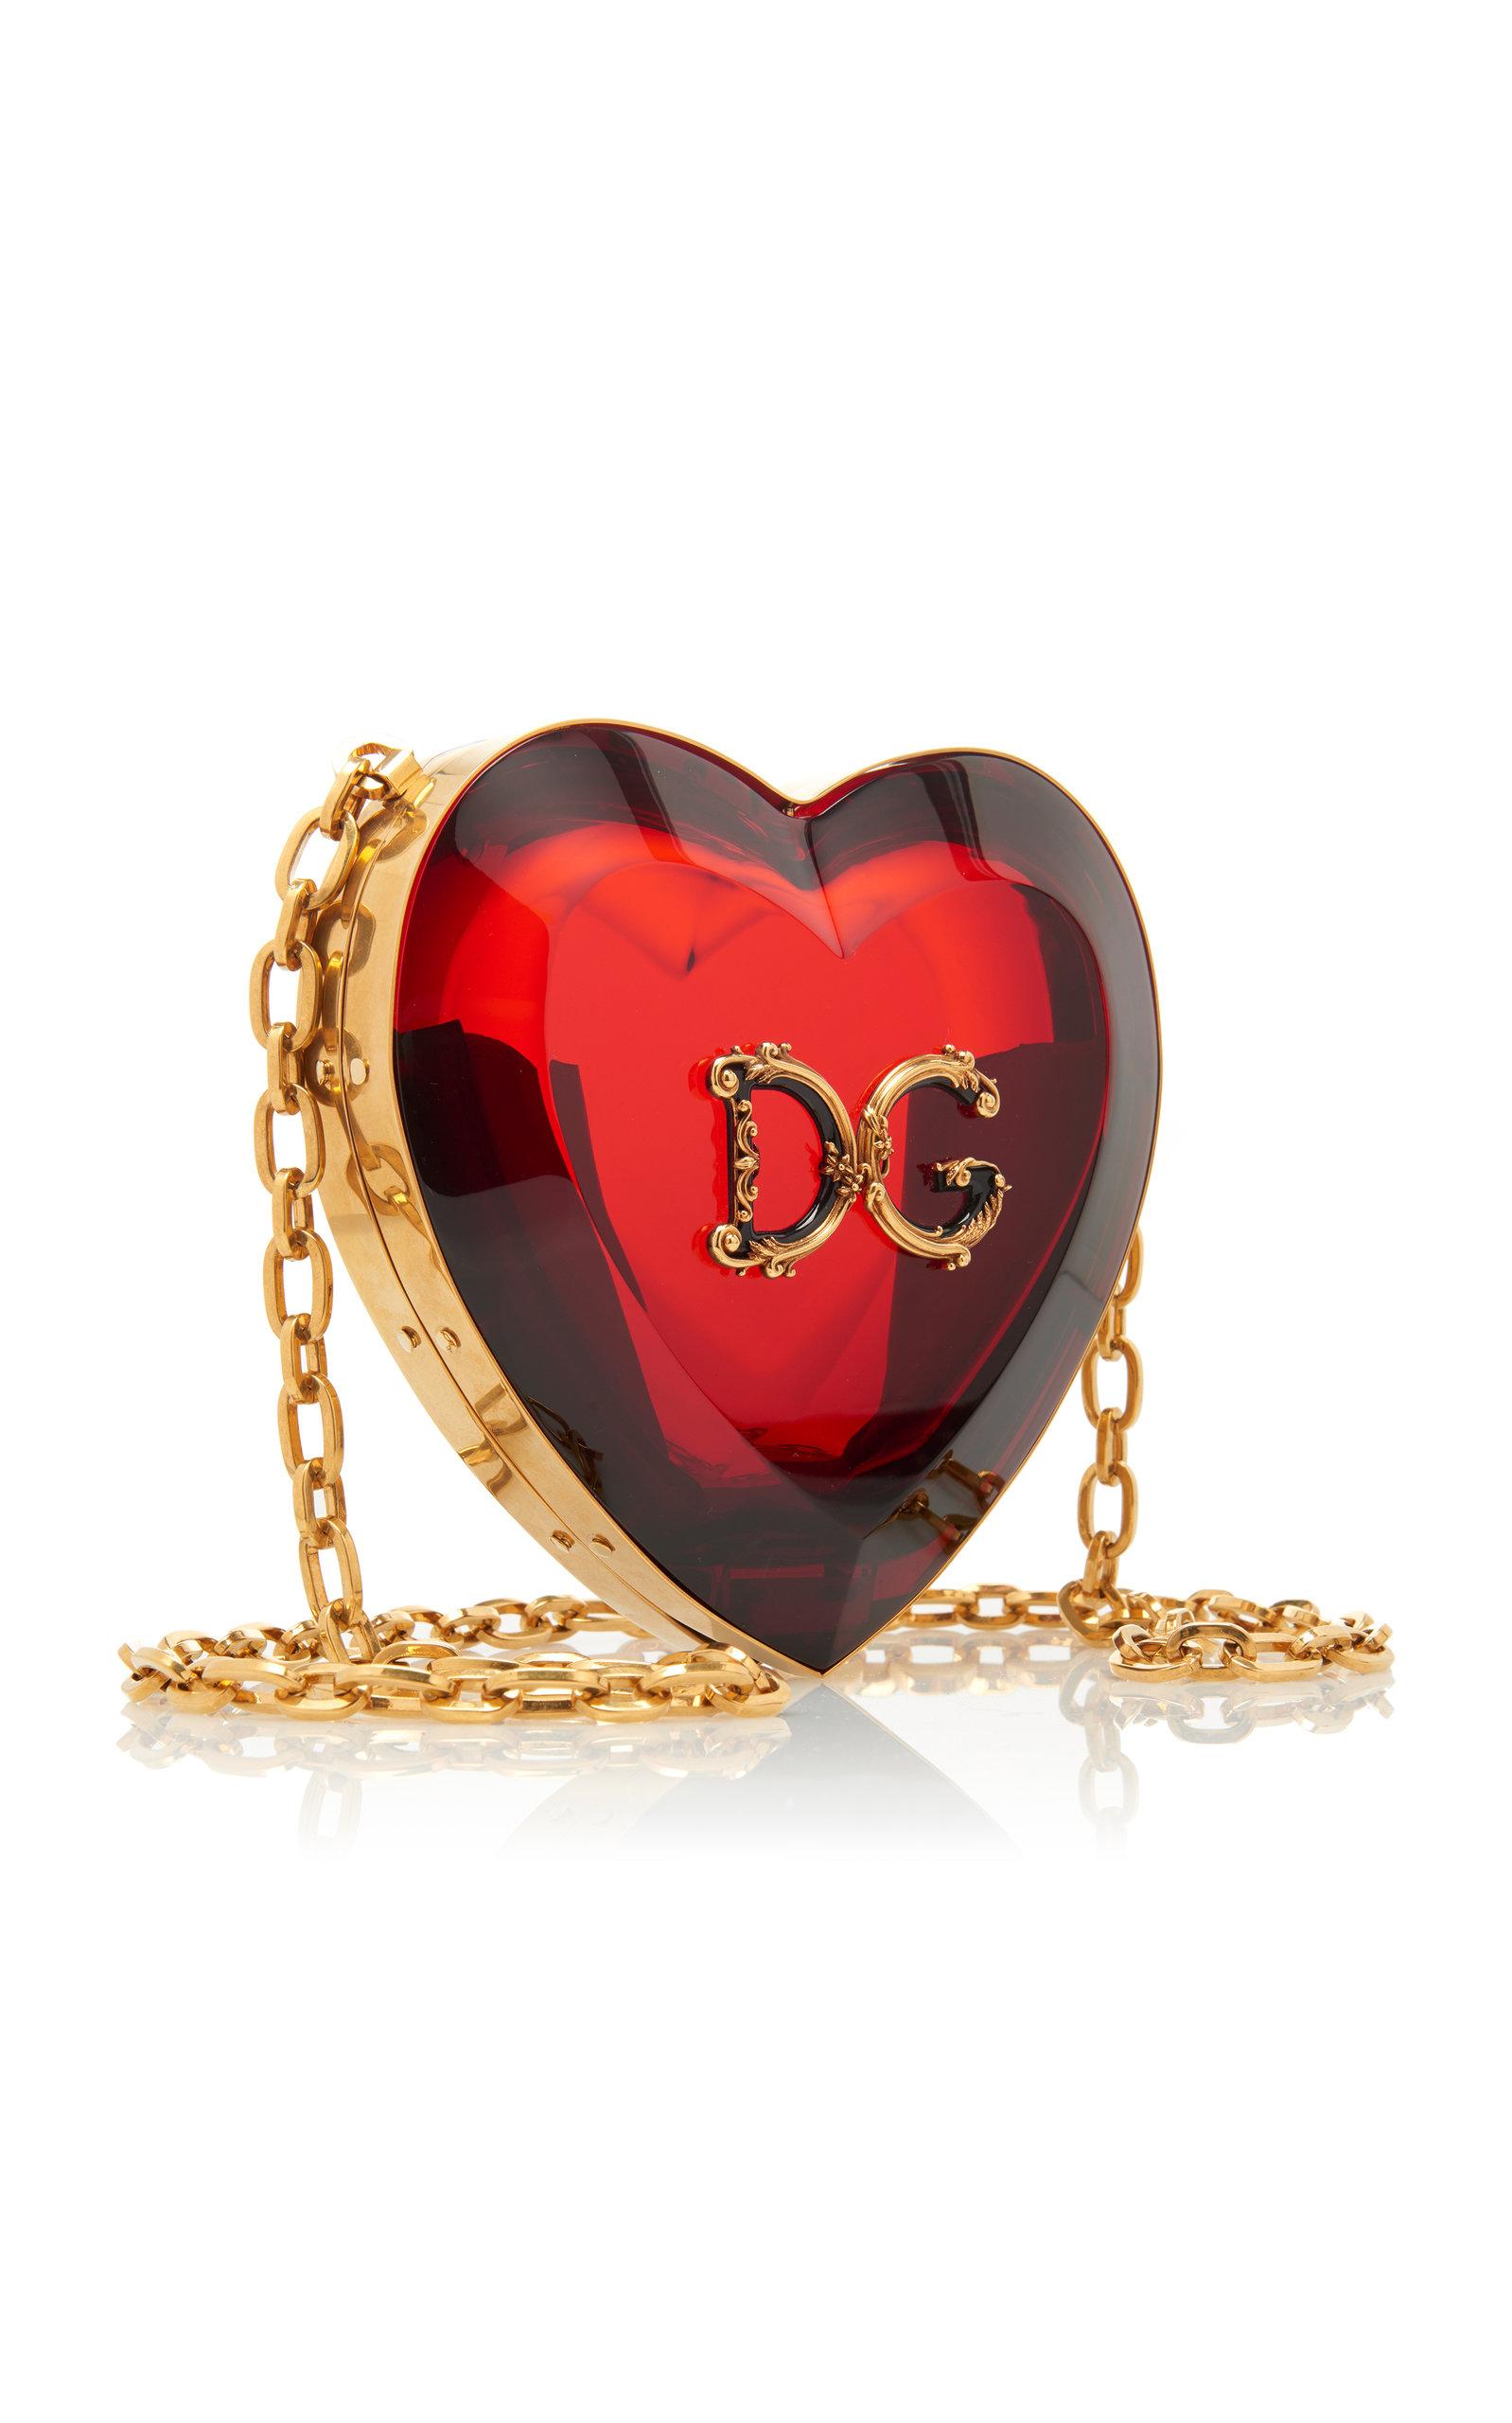 Dolce & Gabbana Heart-shaped Translucent Acrylic Mini Bag in Red | Lyst